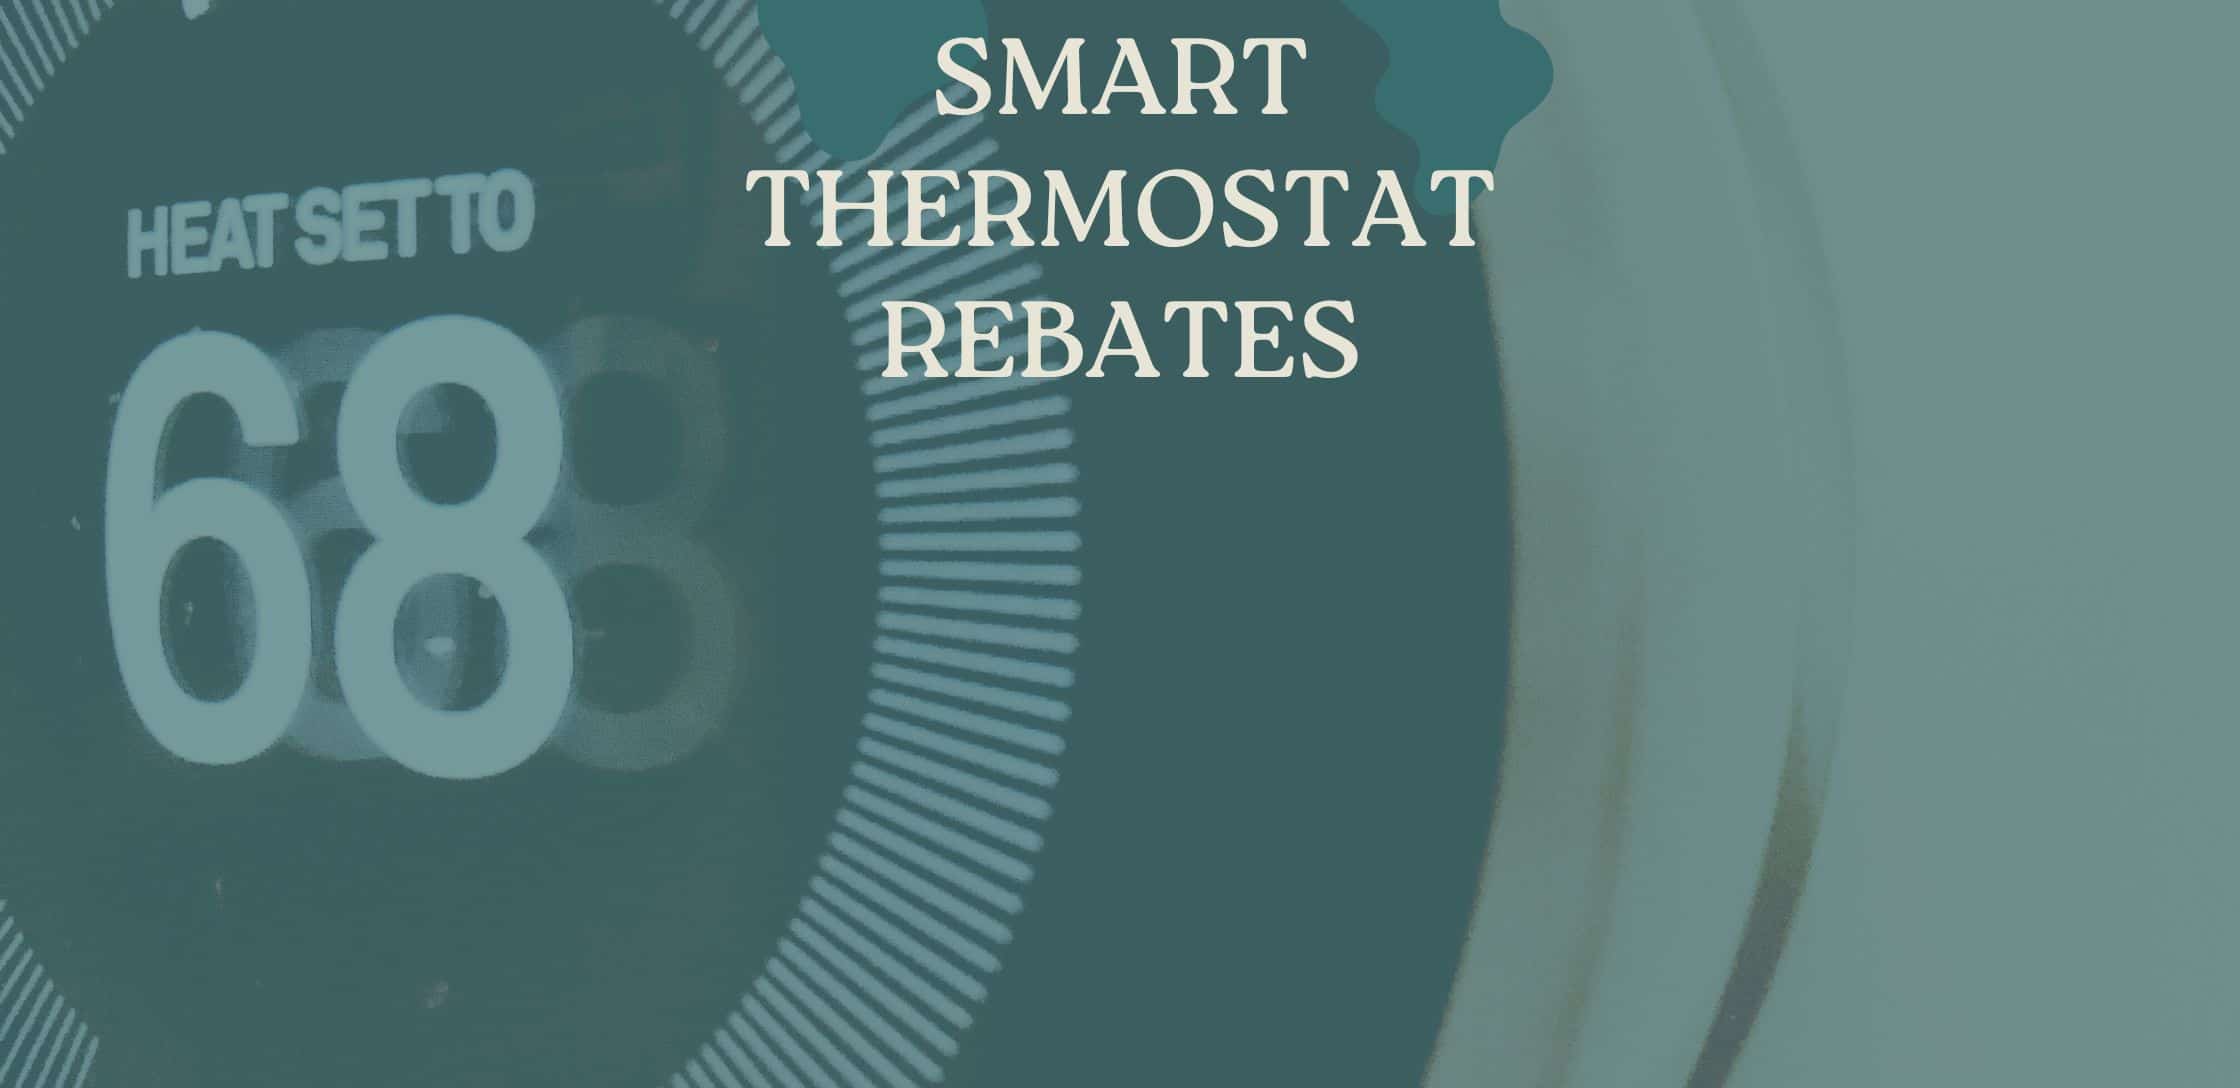 save-with-rebates-on-smart-thermostats-and-more-energy-saving-appliances